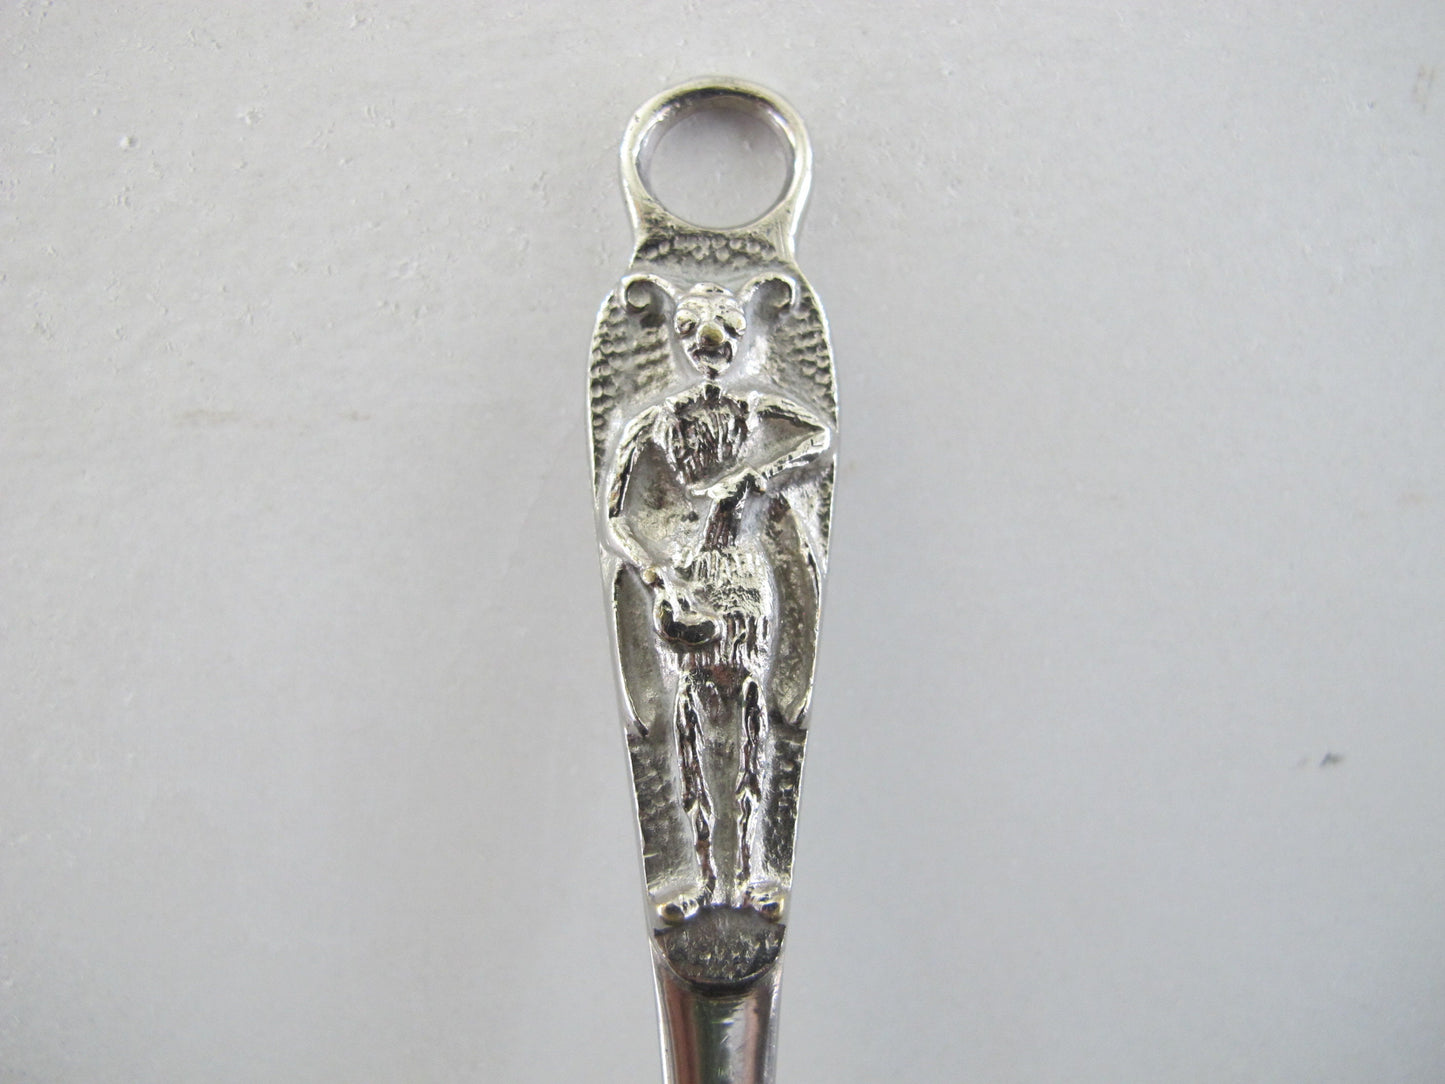 Honey Spoon with Bee English 1930s Mutant Human Bee Silver Plate